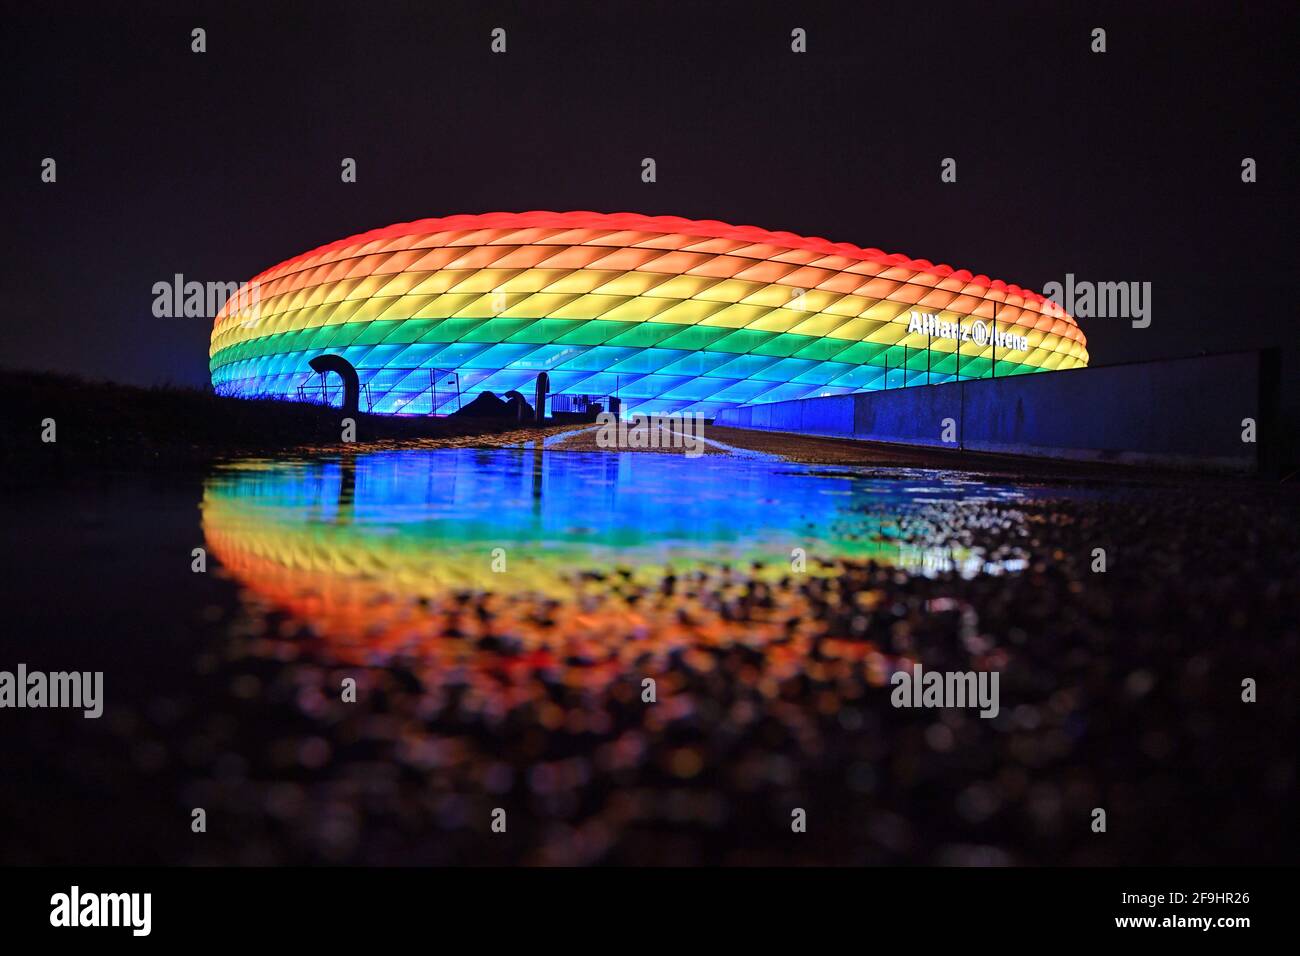 European Championship hosts Munich - UEFA demands audience guarantee! The European Football Union has increased the pressure on the German EM location Munich and set a deadline for a spectator guarantee. "Additional information" on the plans should be submitted by the executive meeting on April 19th. Archive photo: The Allianz Arena shines in the rainbow colors as a symbol of tolerance and versus discrimination. Overview, exterior shot. Soccer 1. Bundesliga season 2020/2021, 19.matchday, matchday19, FC Bayern Munich-TSG 1899 Hoffenheim 4-1 on January 30th, 2021 ALLIANZ ARENA. ¬ | usage worldwi Stock Photo